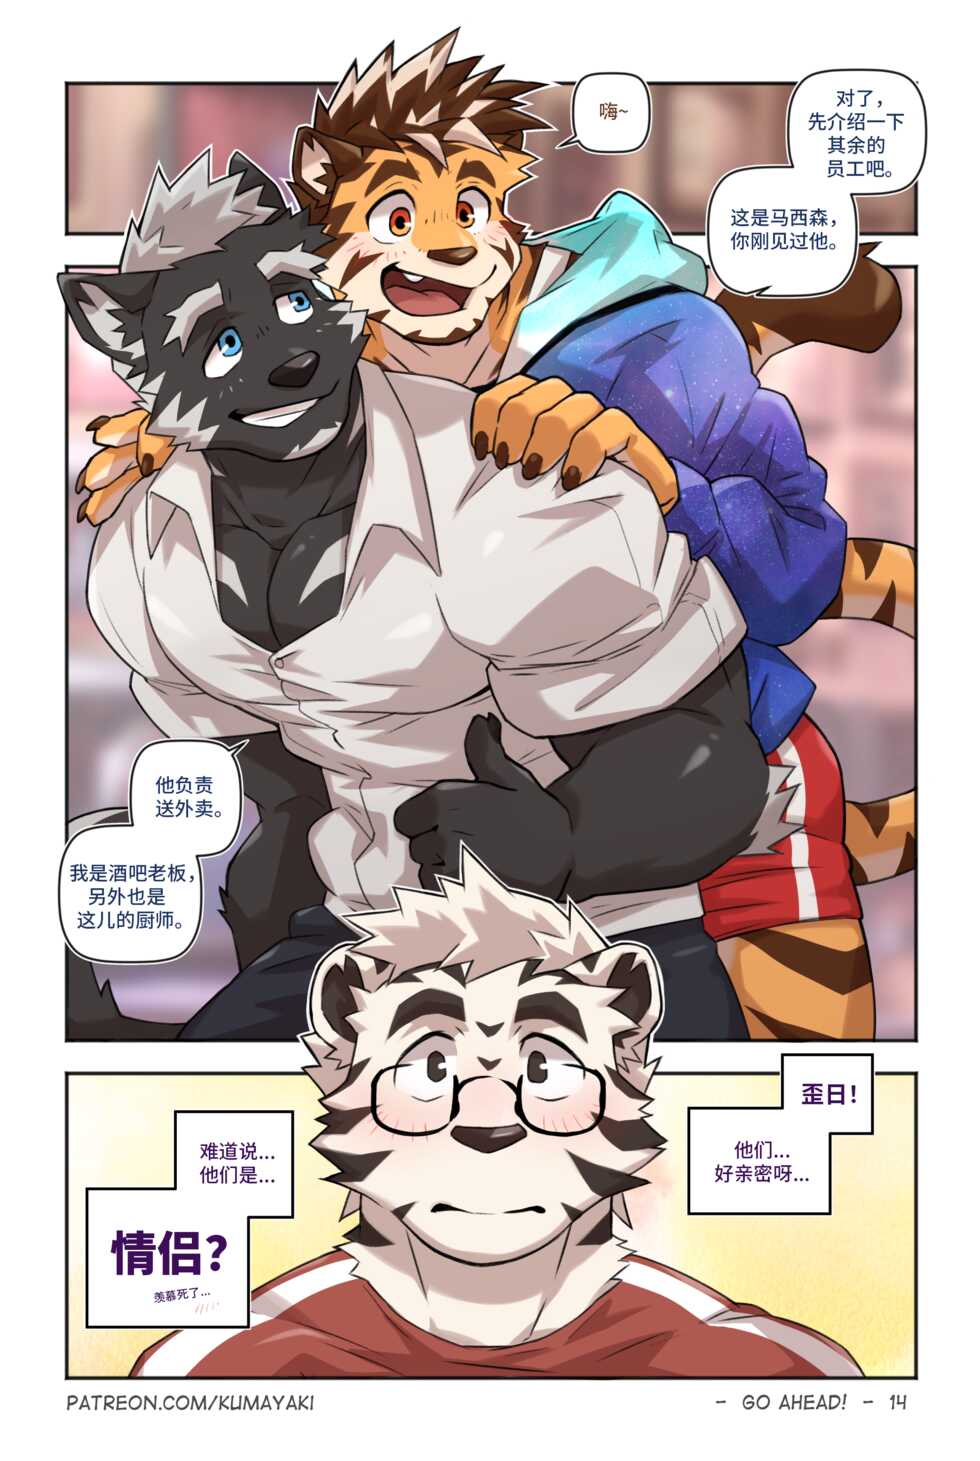 [KUMAK] Lucky Boys - Go Ahead! - (狗大汉化) [Simplified Chinese] [Ongoing] - Page 19